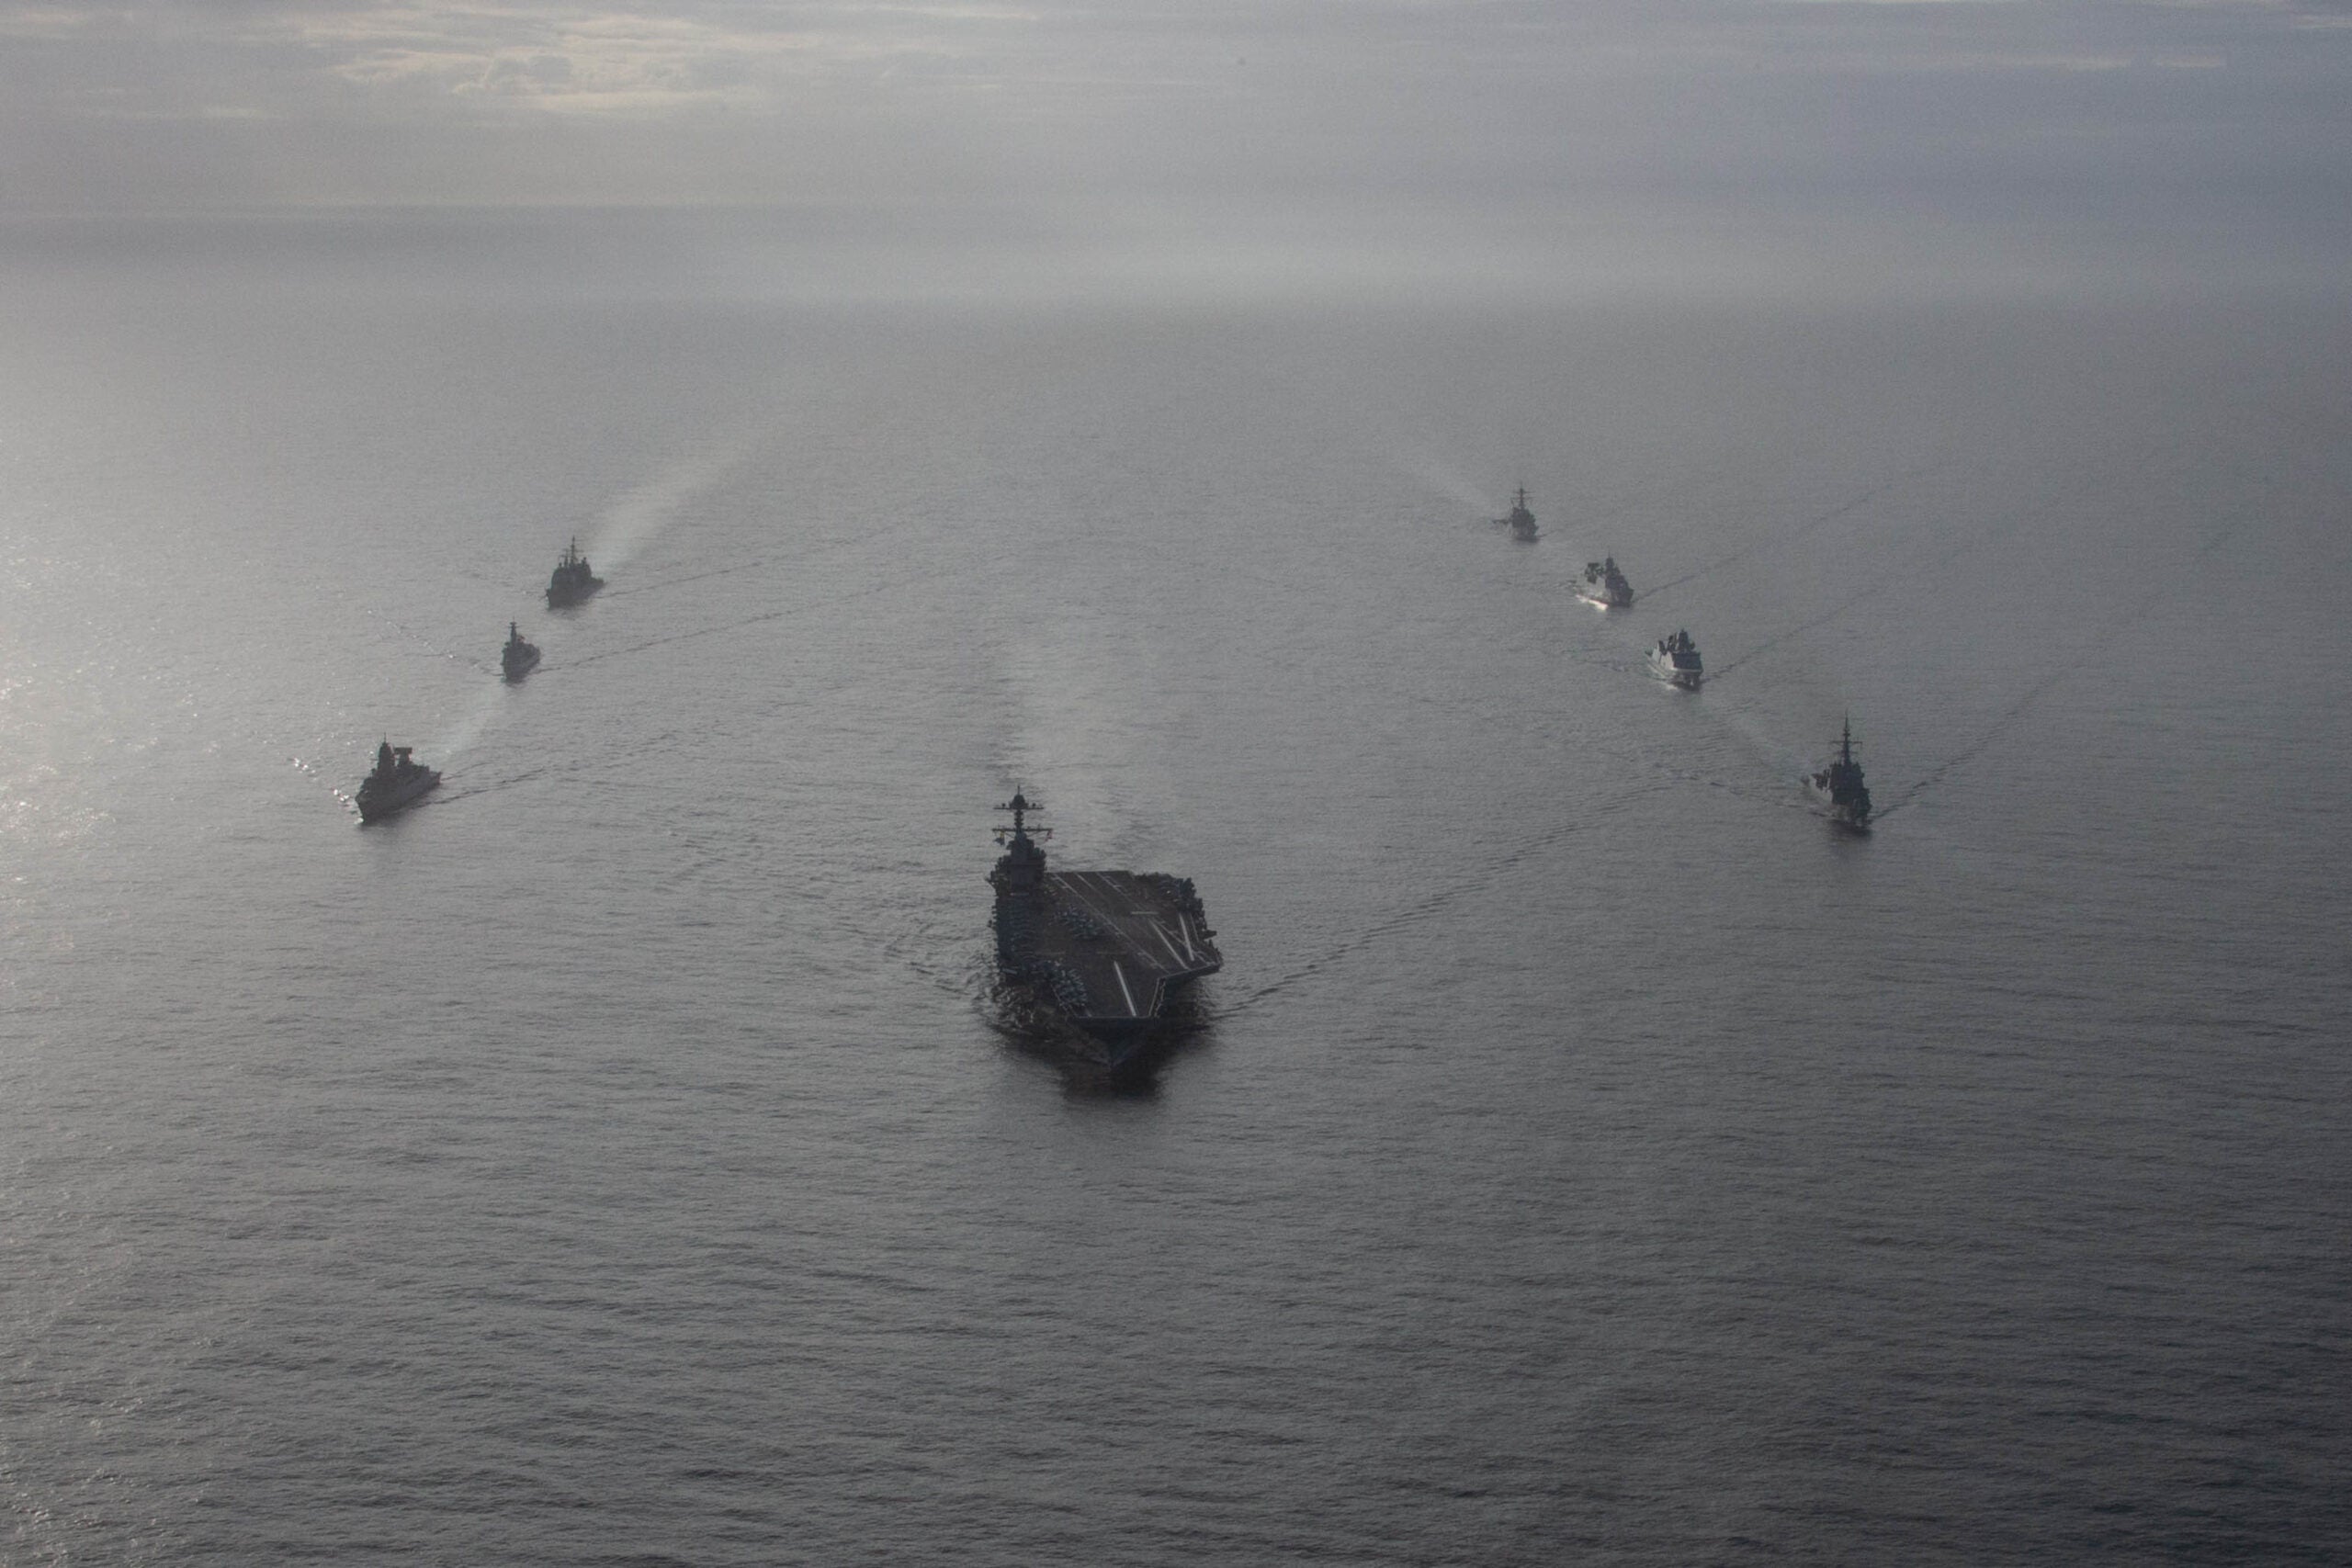 The first-in-class aircraft carrier USS Gerald R. Ford steams in formation with Spanish Armada frigate Álvaro de Bazán , Danish frigate HDMS Peter Willemoes, Dutch frigate HNLMS De Zeven Provincien, Arleigh Burke-class guided-missile destroyer USS Ramage, German frigate FGS Hessen, Dutch frigate HNLMS Van Amstel, and Ticonderoga-class guided-missile cruiser USS Normandy, Oct. 25, 2022. 